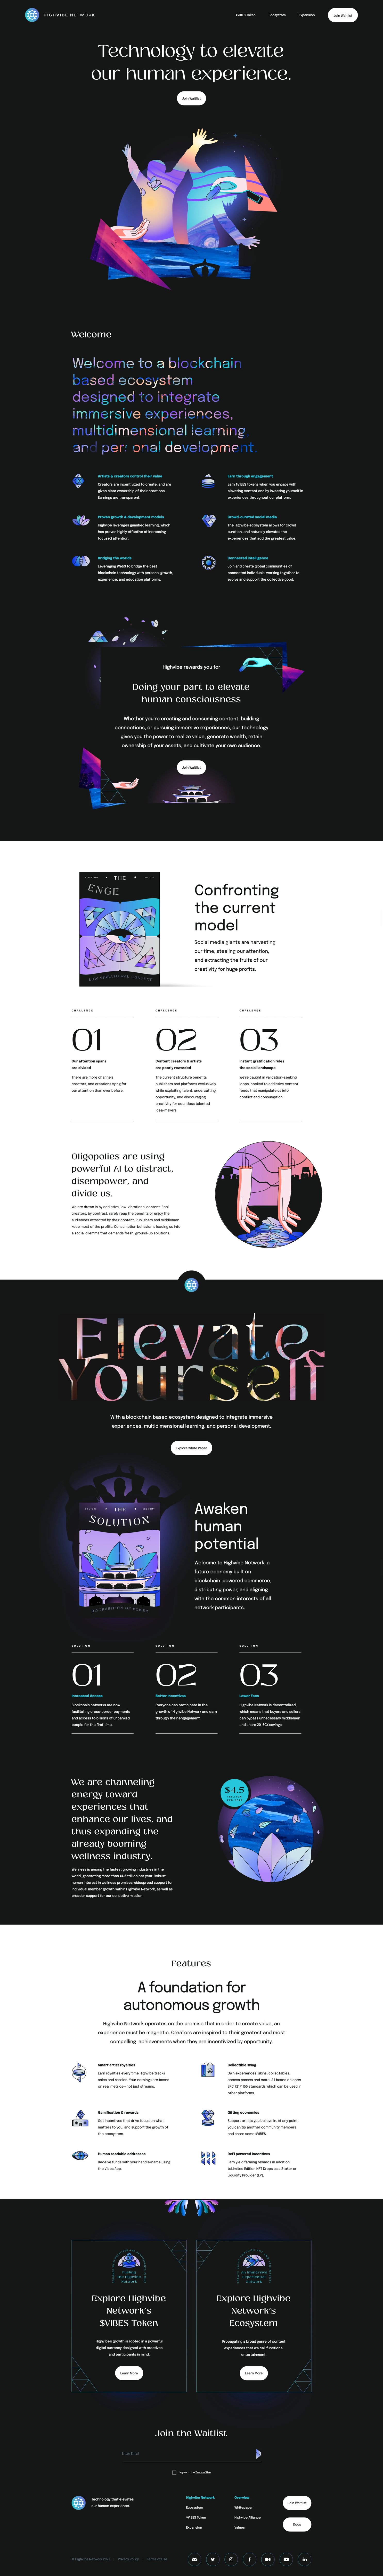 Highvibe Network Landing Page Example: Welcome to a blockchain based ecosystem designed to integrate immersive experiences, multidimensional learning, and personal development.